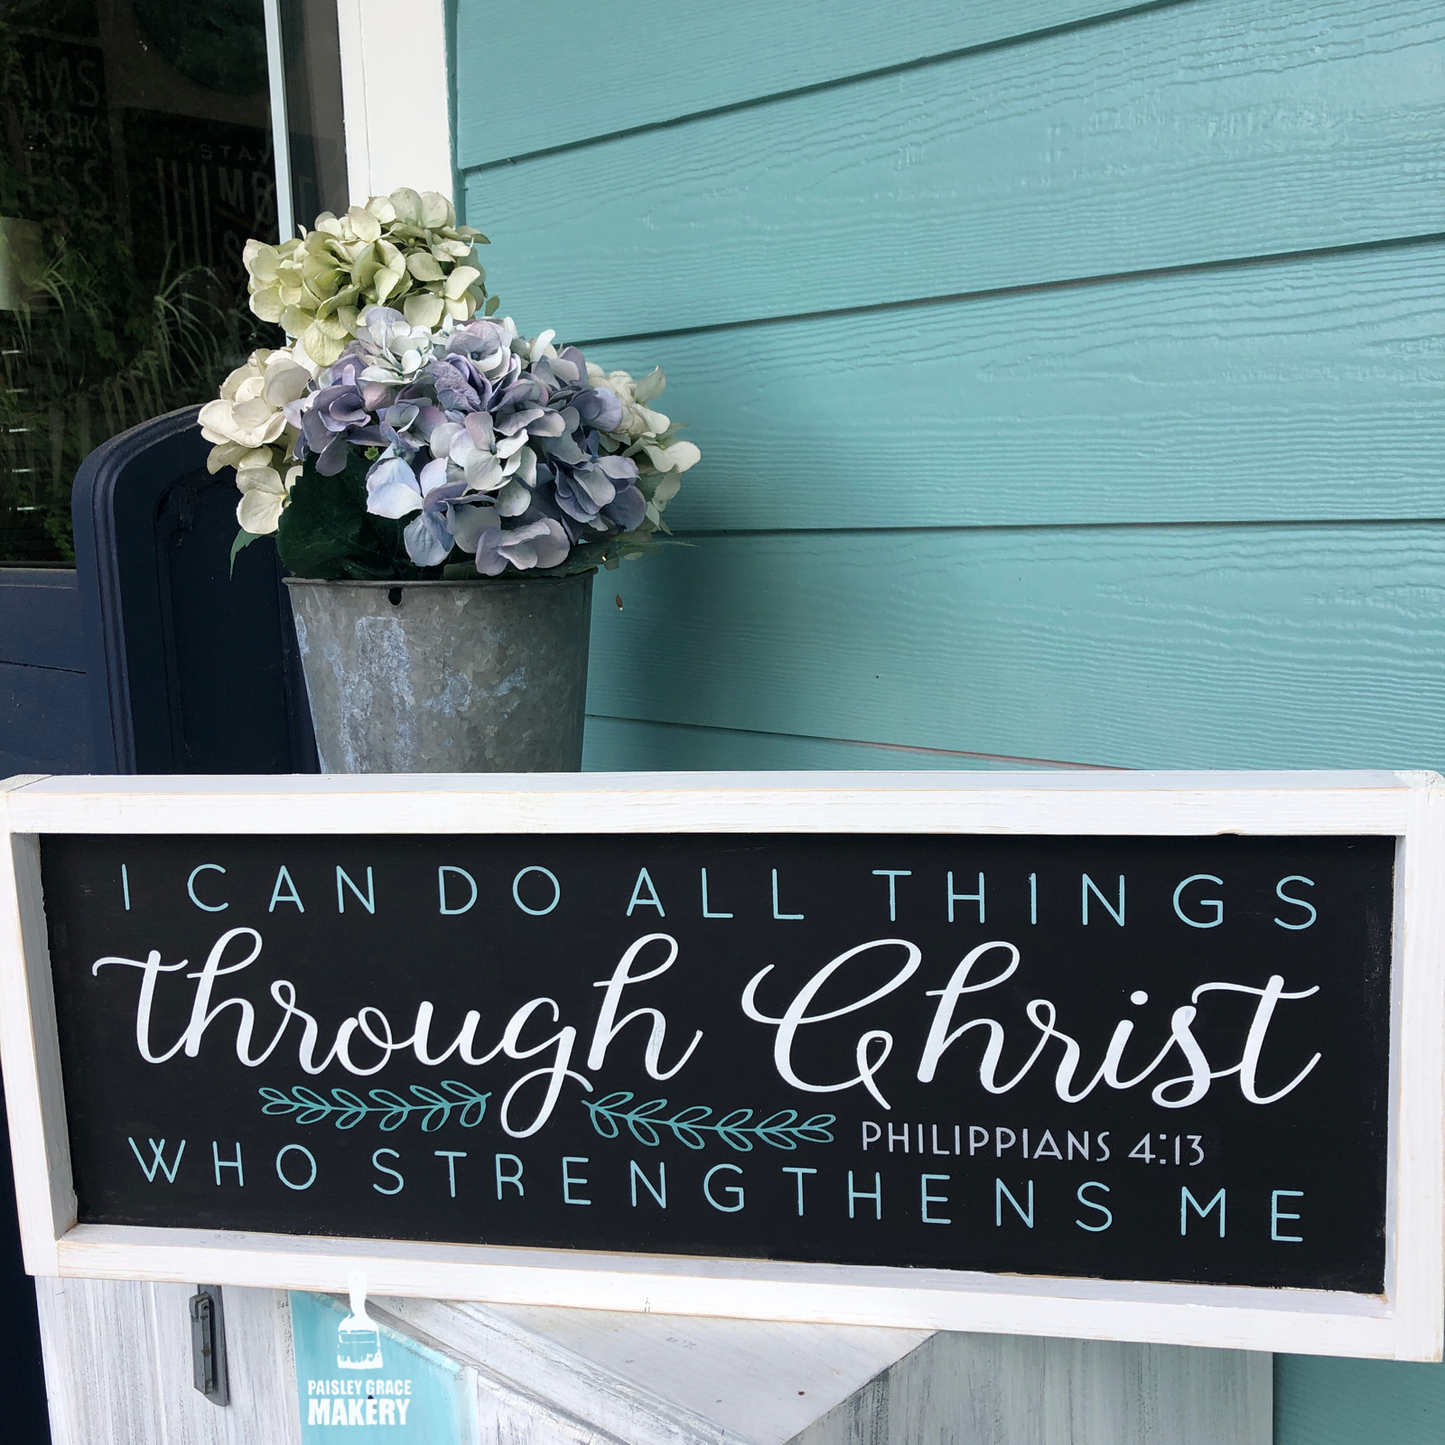 I can do all things through Christ who Strengthens Me: Plank Design - Paisley Grace Makery